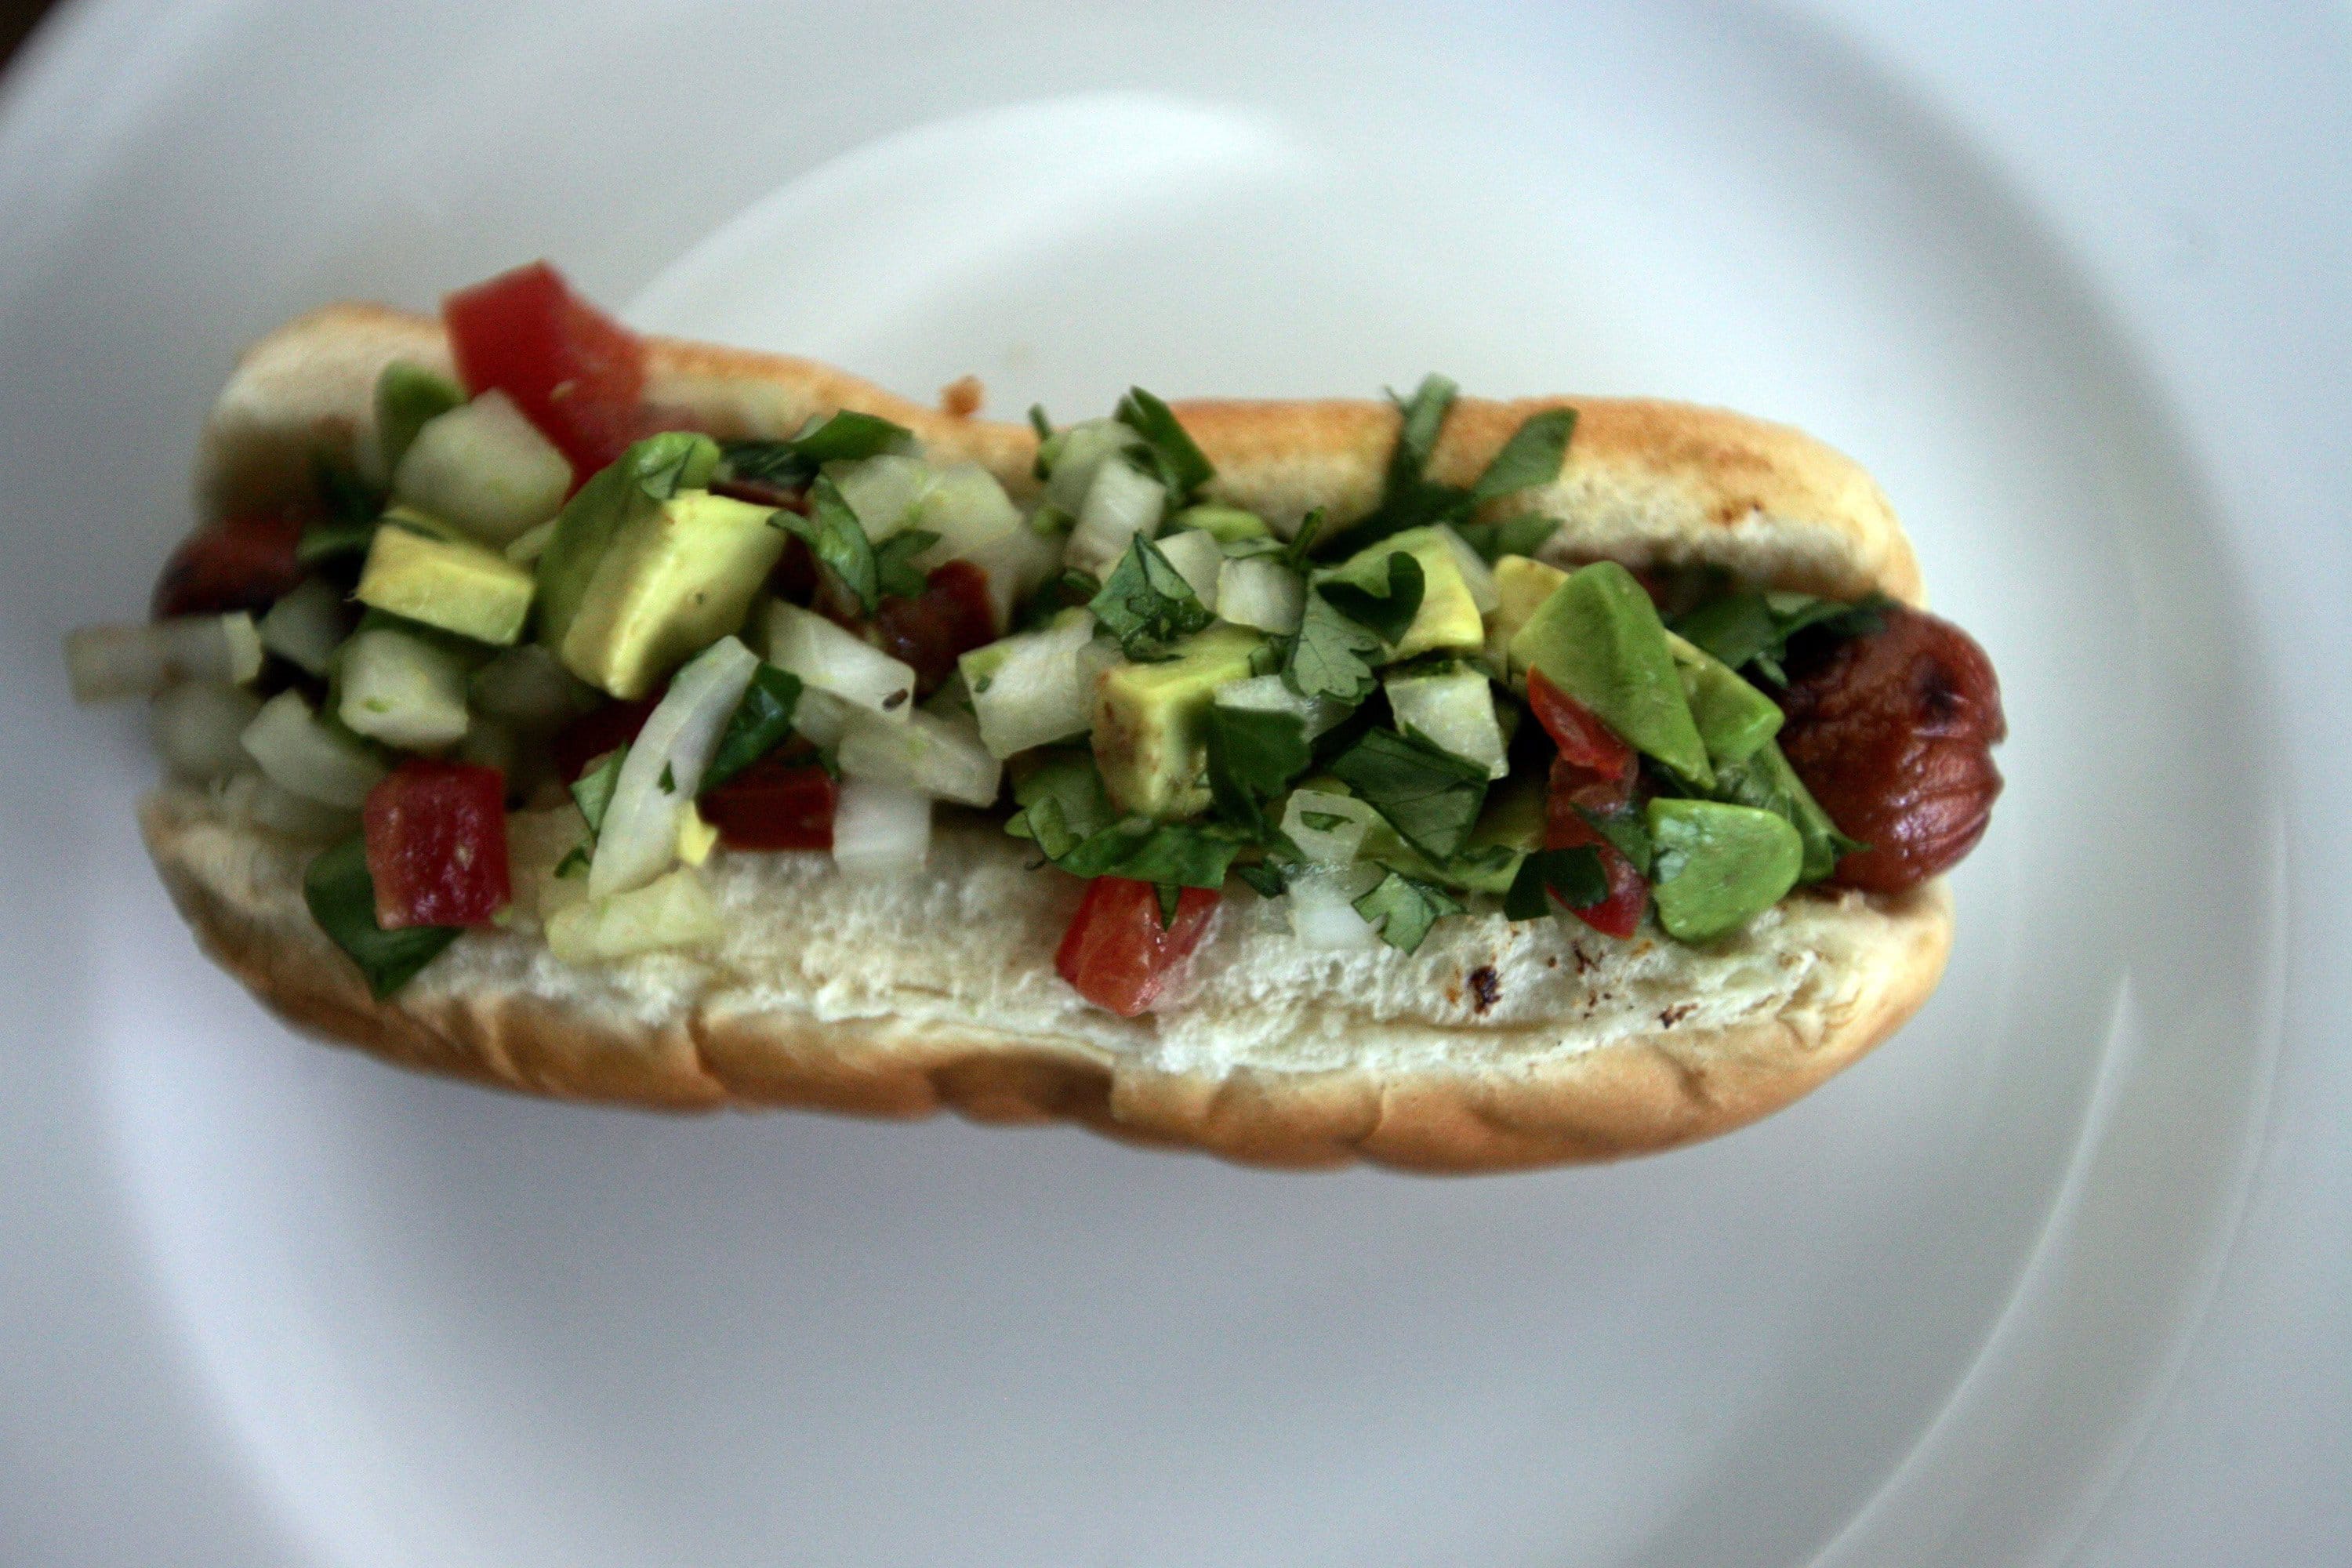 An avocado and spicy relish can dazzle during hot dog season.